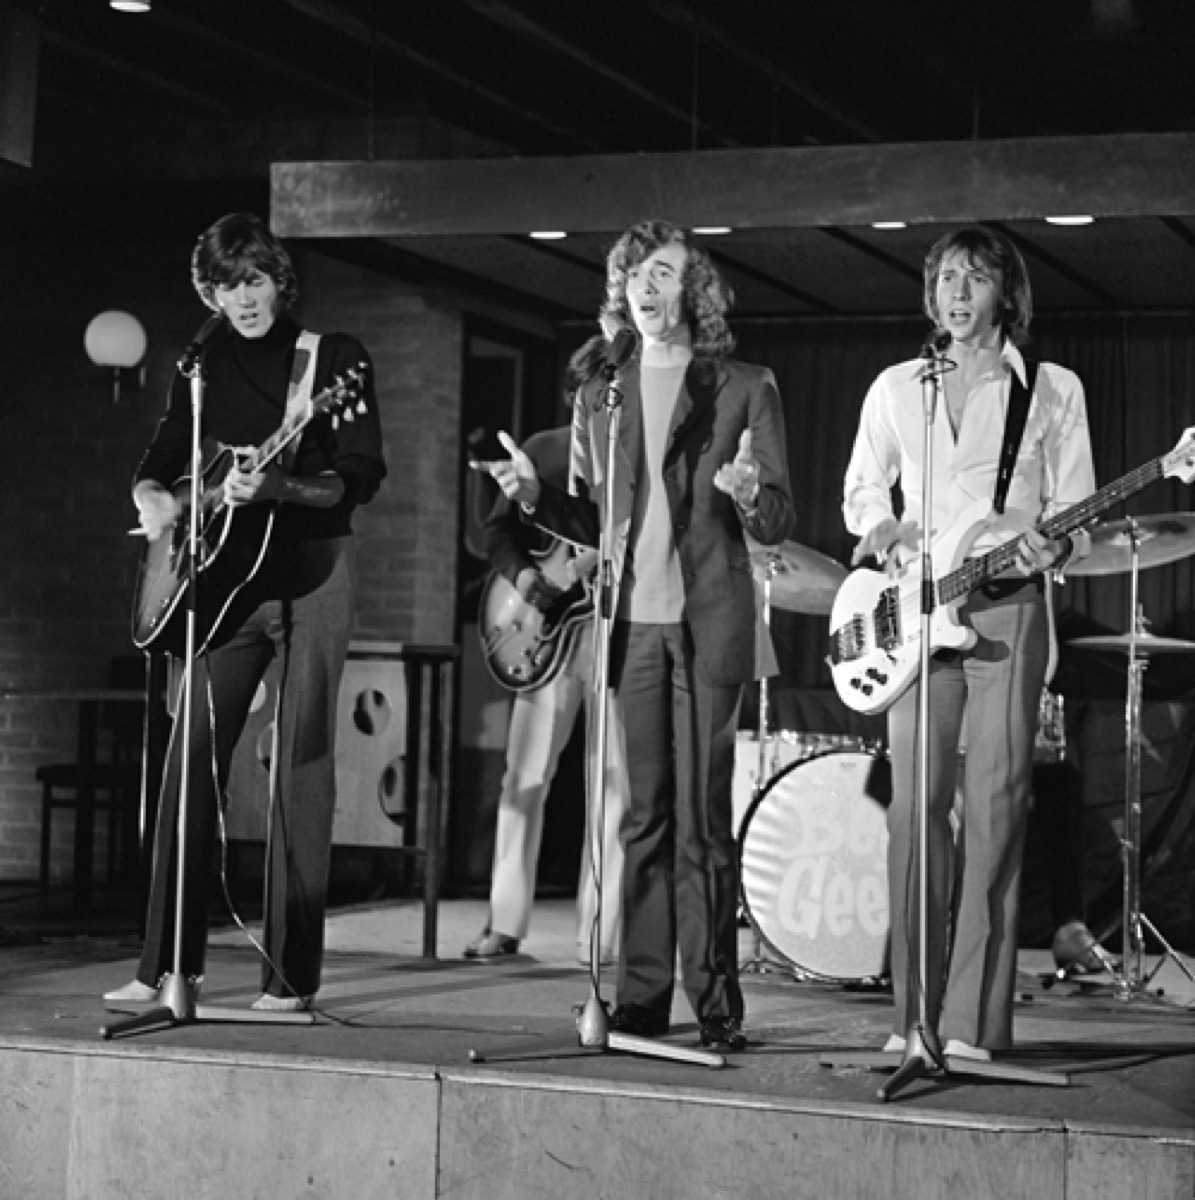 Bee Gees perform on stage on Dutch TV show in 1968, they wrote "Islands in the Stream"